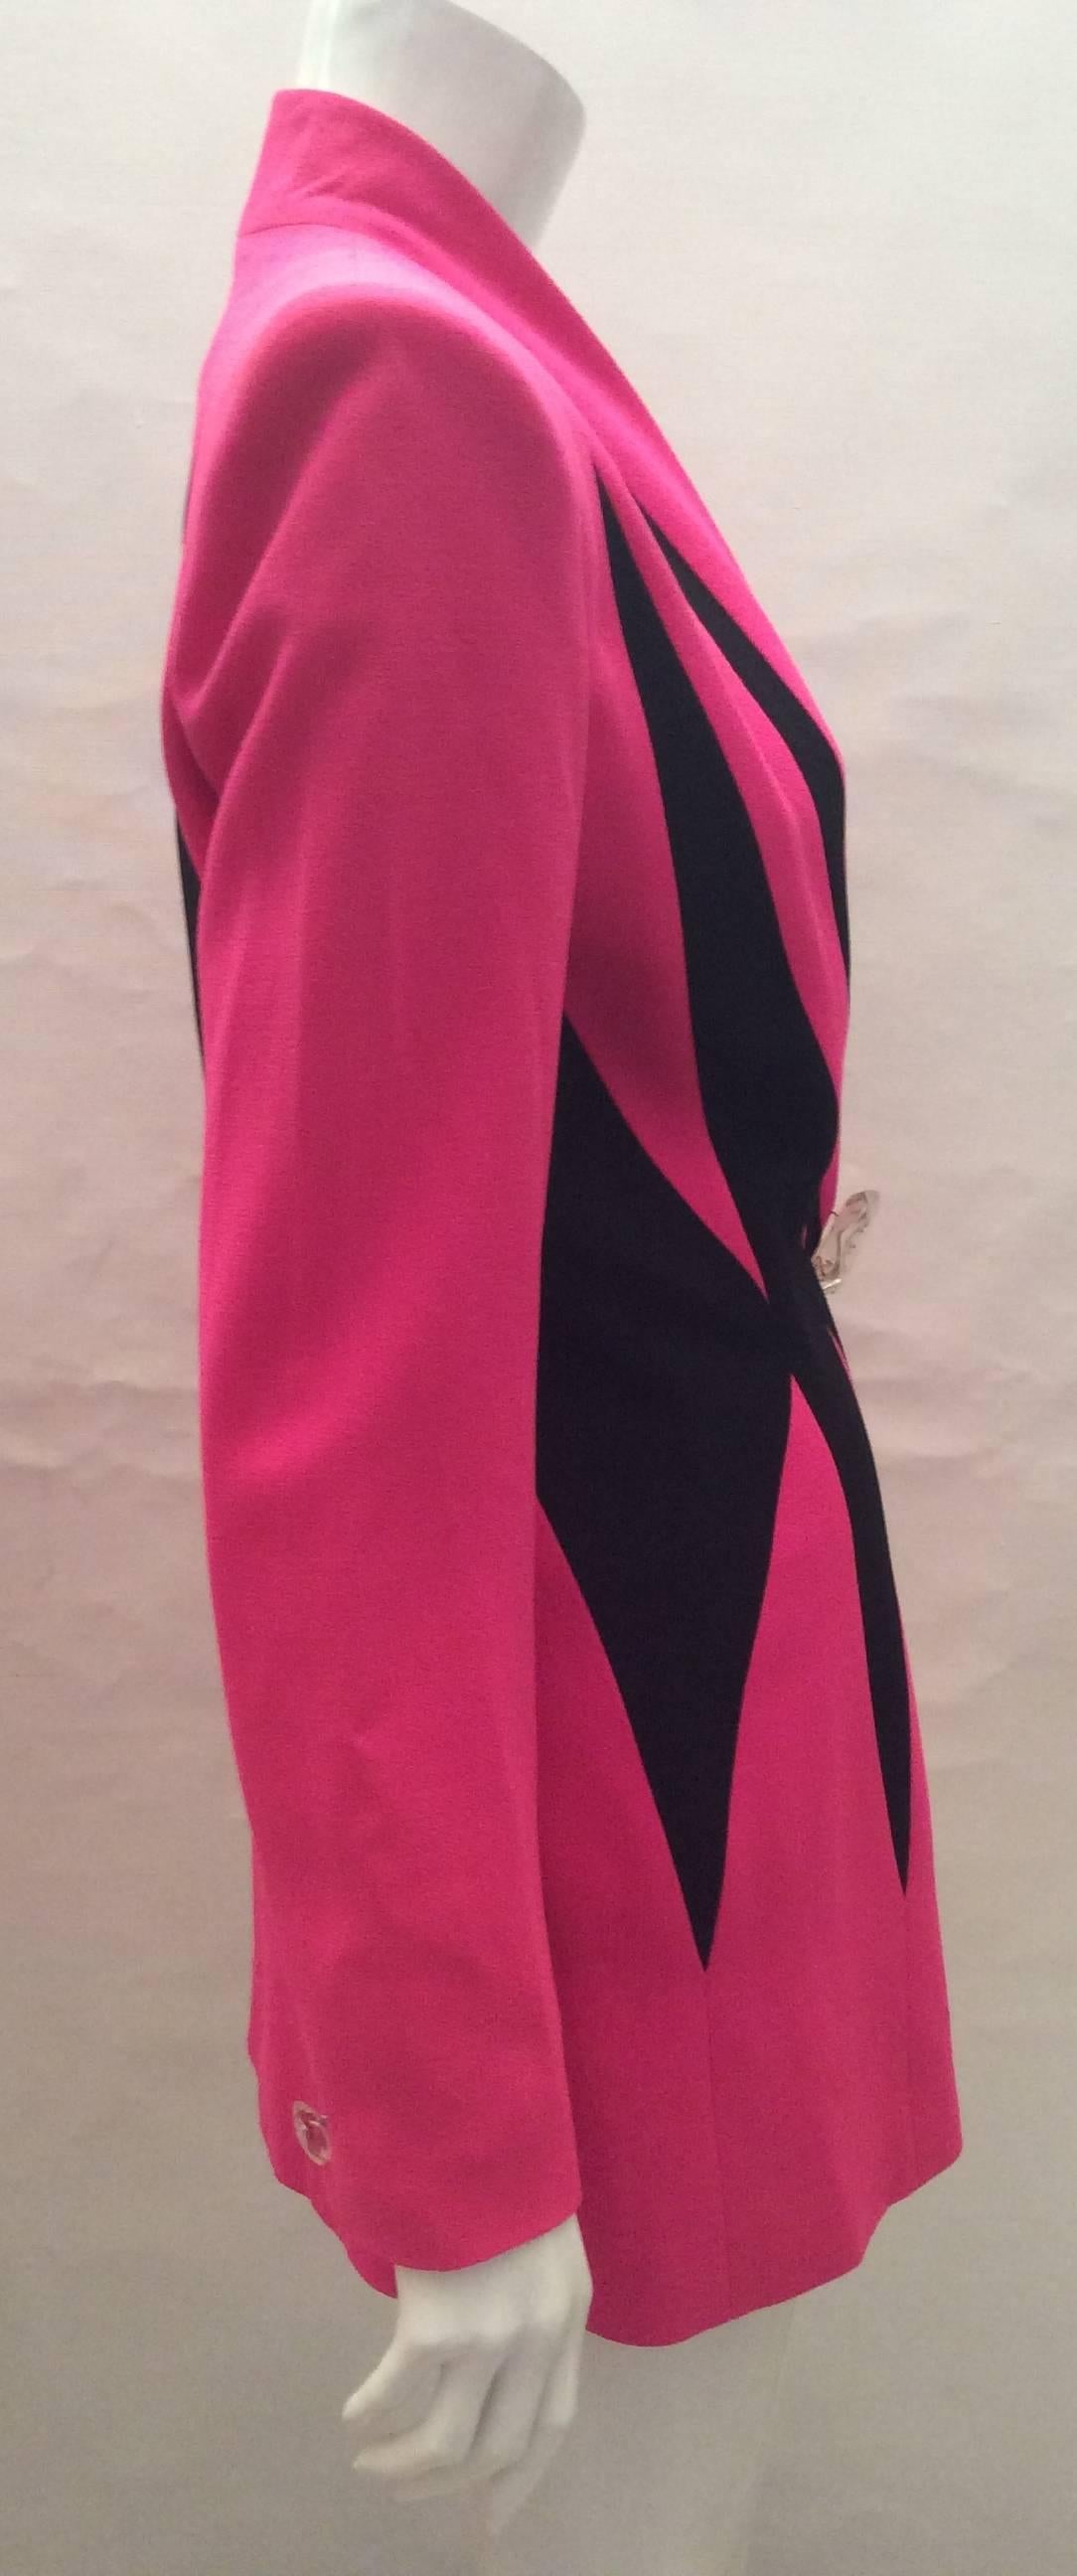 Catherine Gerard at 35 Chaussee D'Antin was one of the most frequented stores in the 1980's known for its fabulous fashion forward beautiful couture style. This magnificent hot pink jacket with black geometric designs around it is extremely